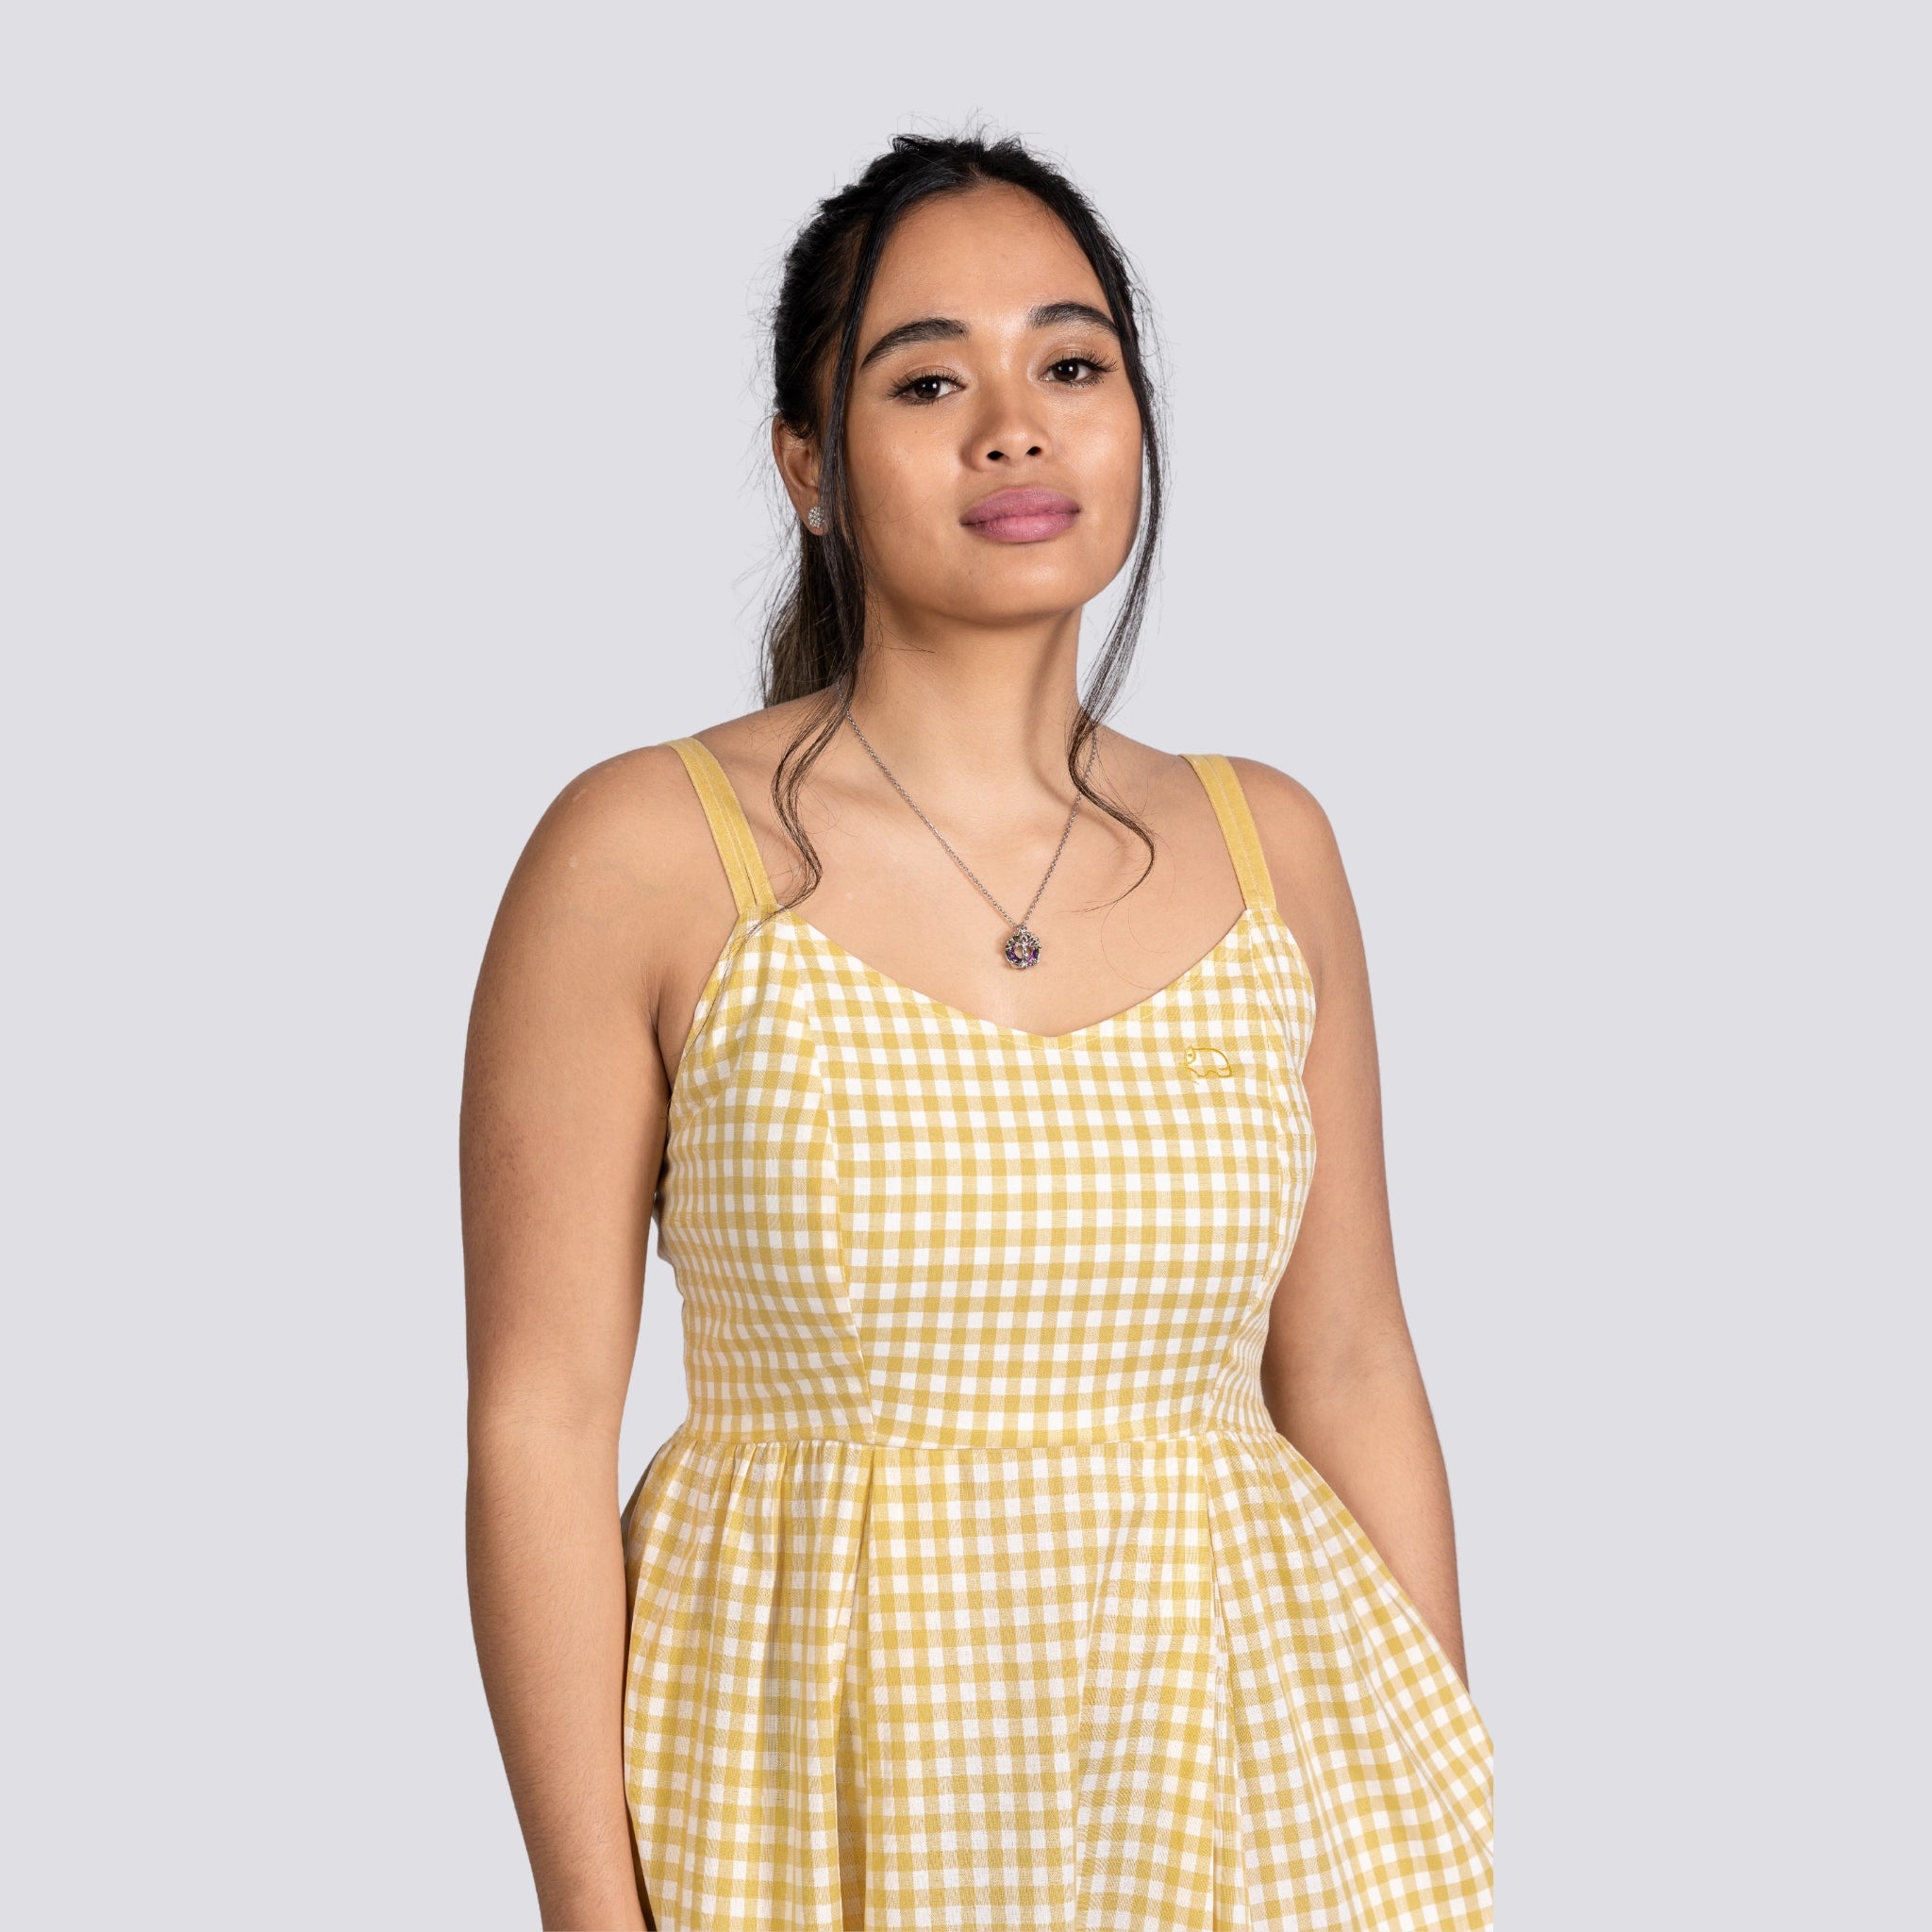 A young woman in a Sunshine Chic Yellow Plaid Cotton Mini Dress by Karee stands against a gray background, looking slightly to her left with a neutral expression.